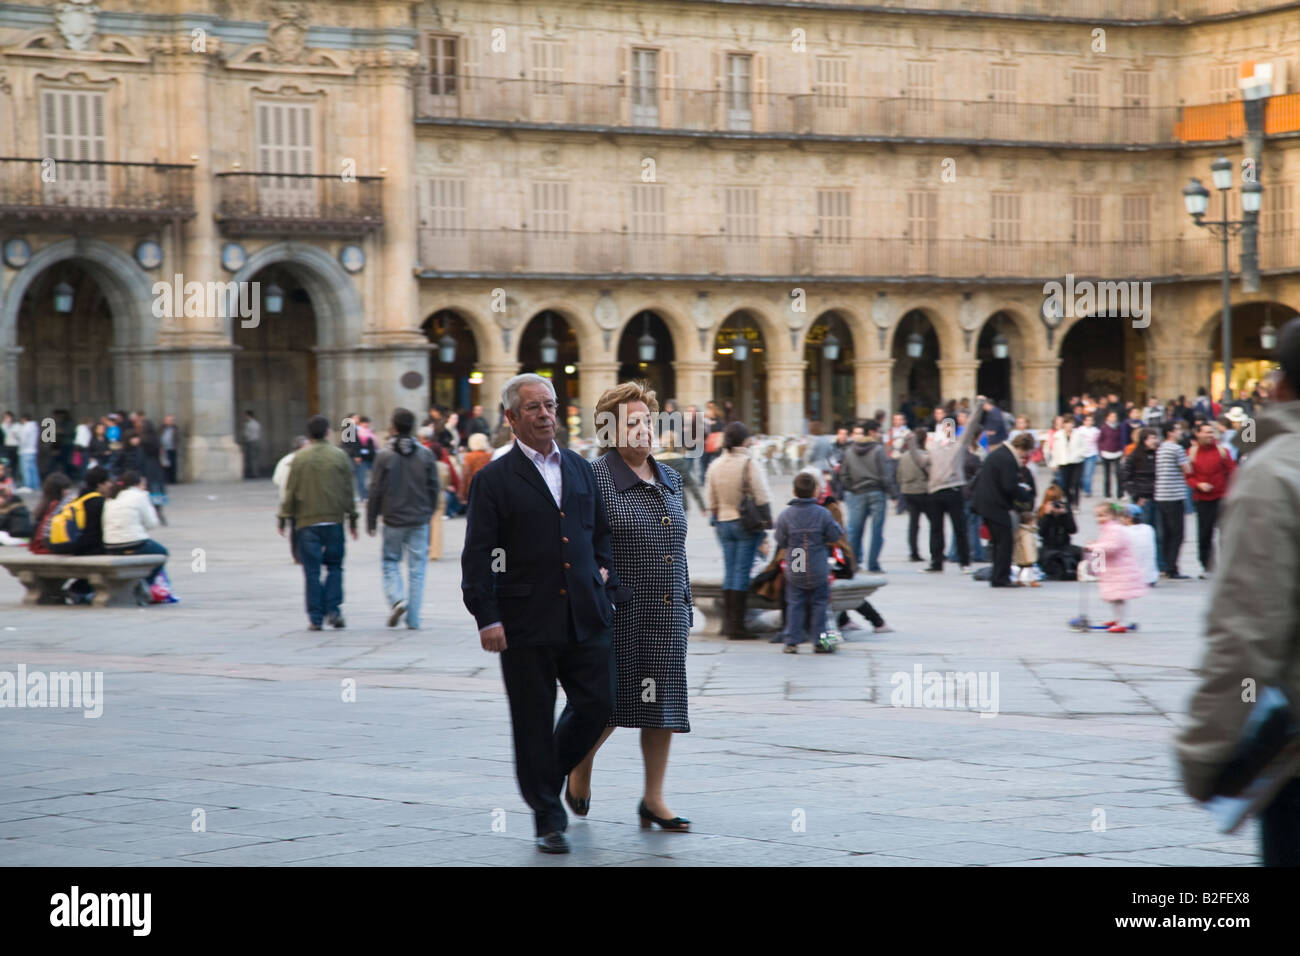 SPAIN Salamanca Older couple walk together through Plaza Mayor public square built in 1700 s crowds of people and tour groups Stock Photo